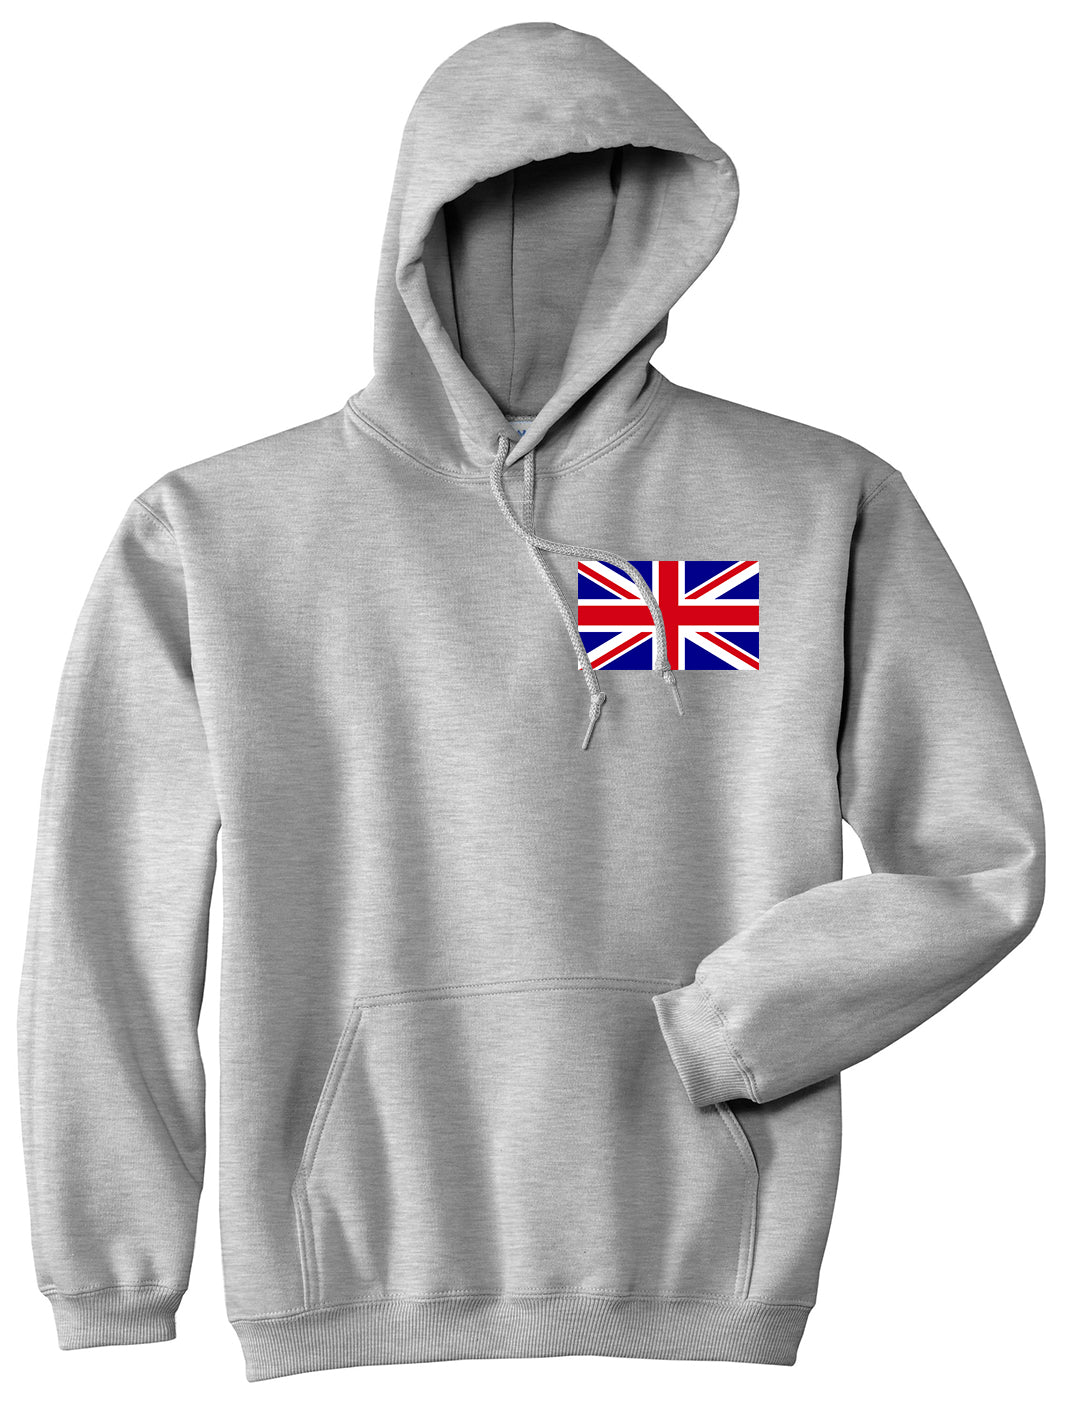 English England Flag Chest Mens Grey Pullover Hoodie by KINGS OF NY